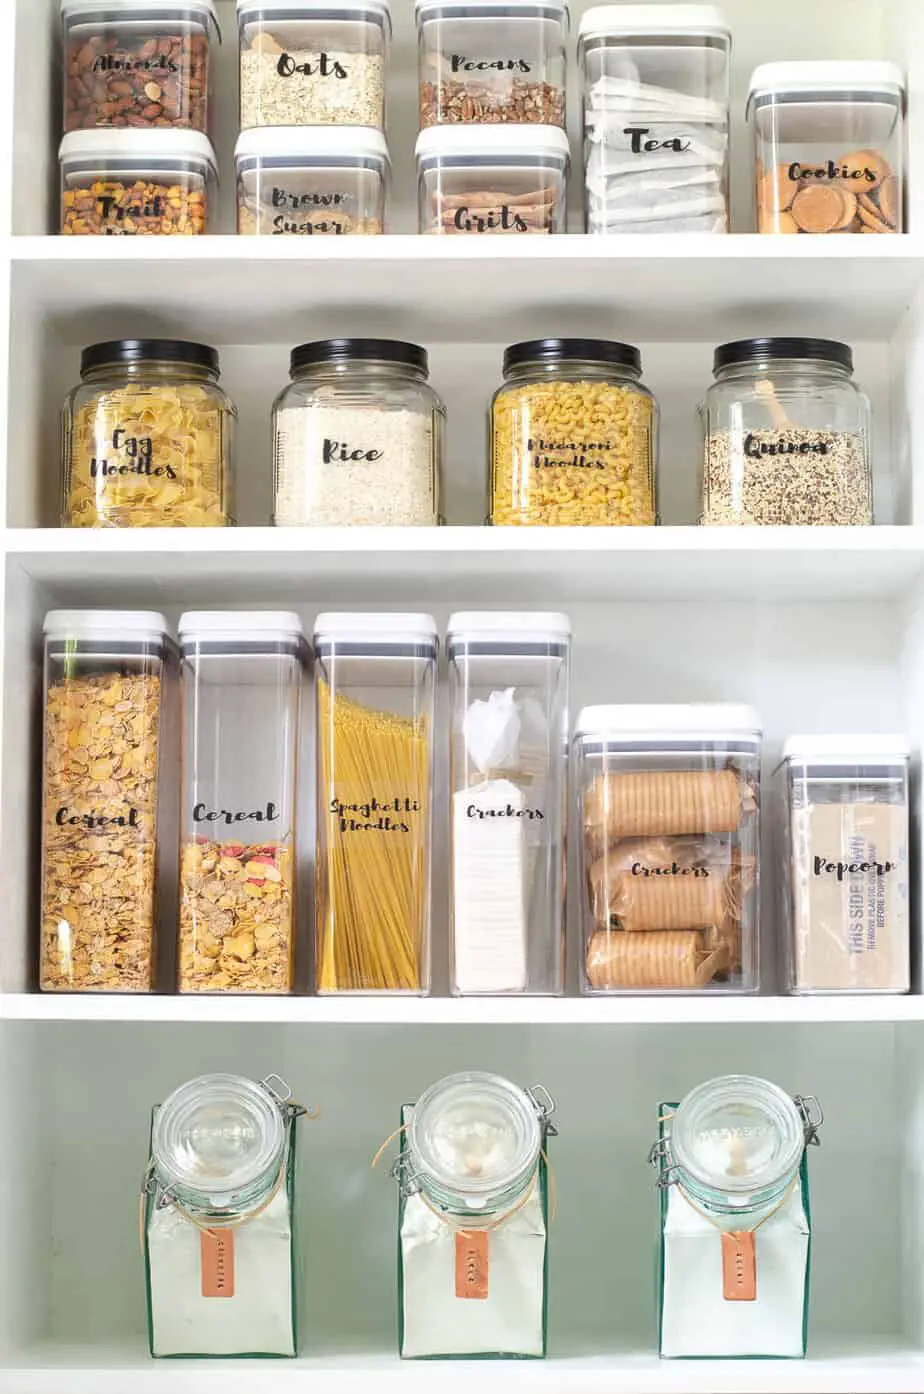 pantry shelving with labeled containers and jars